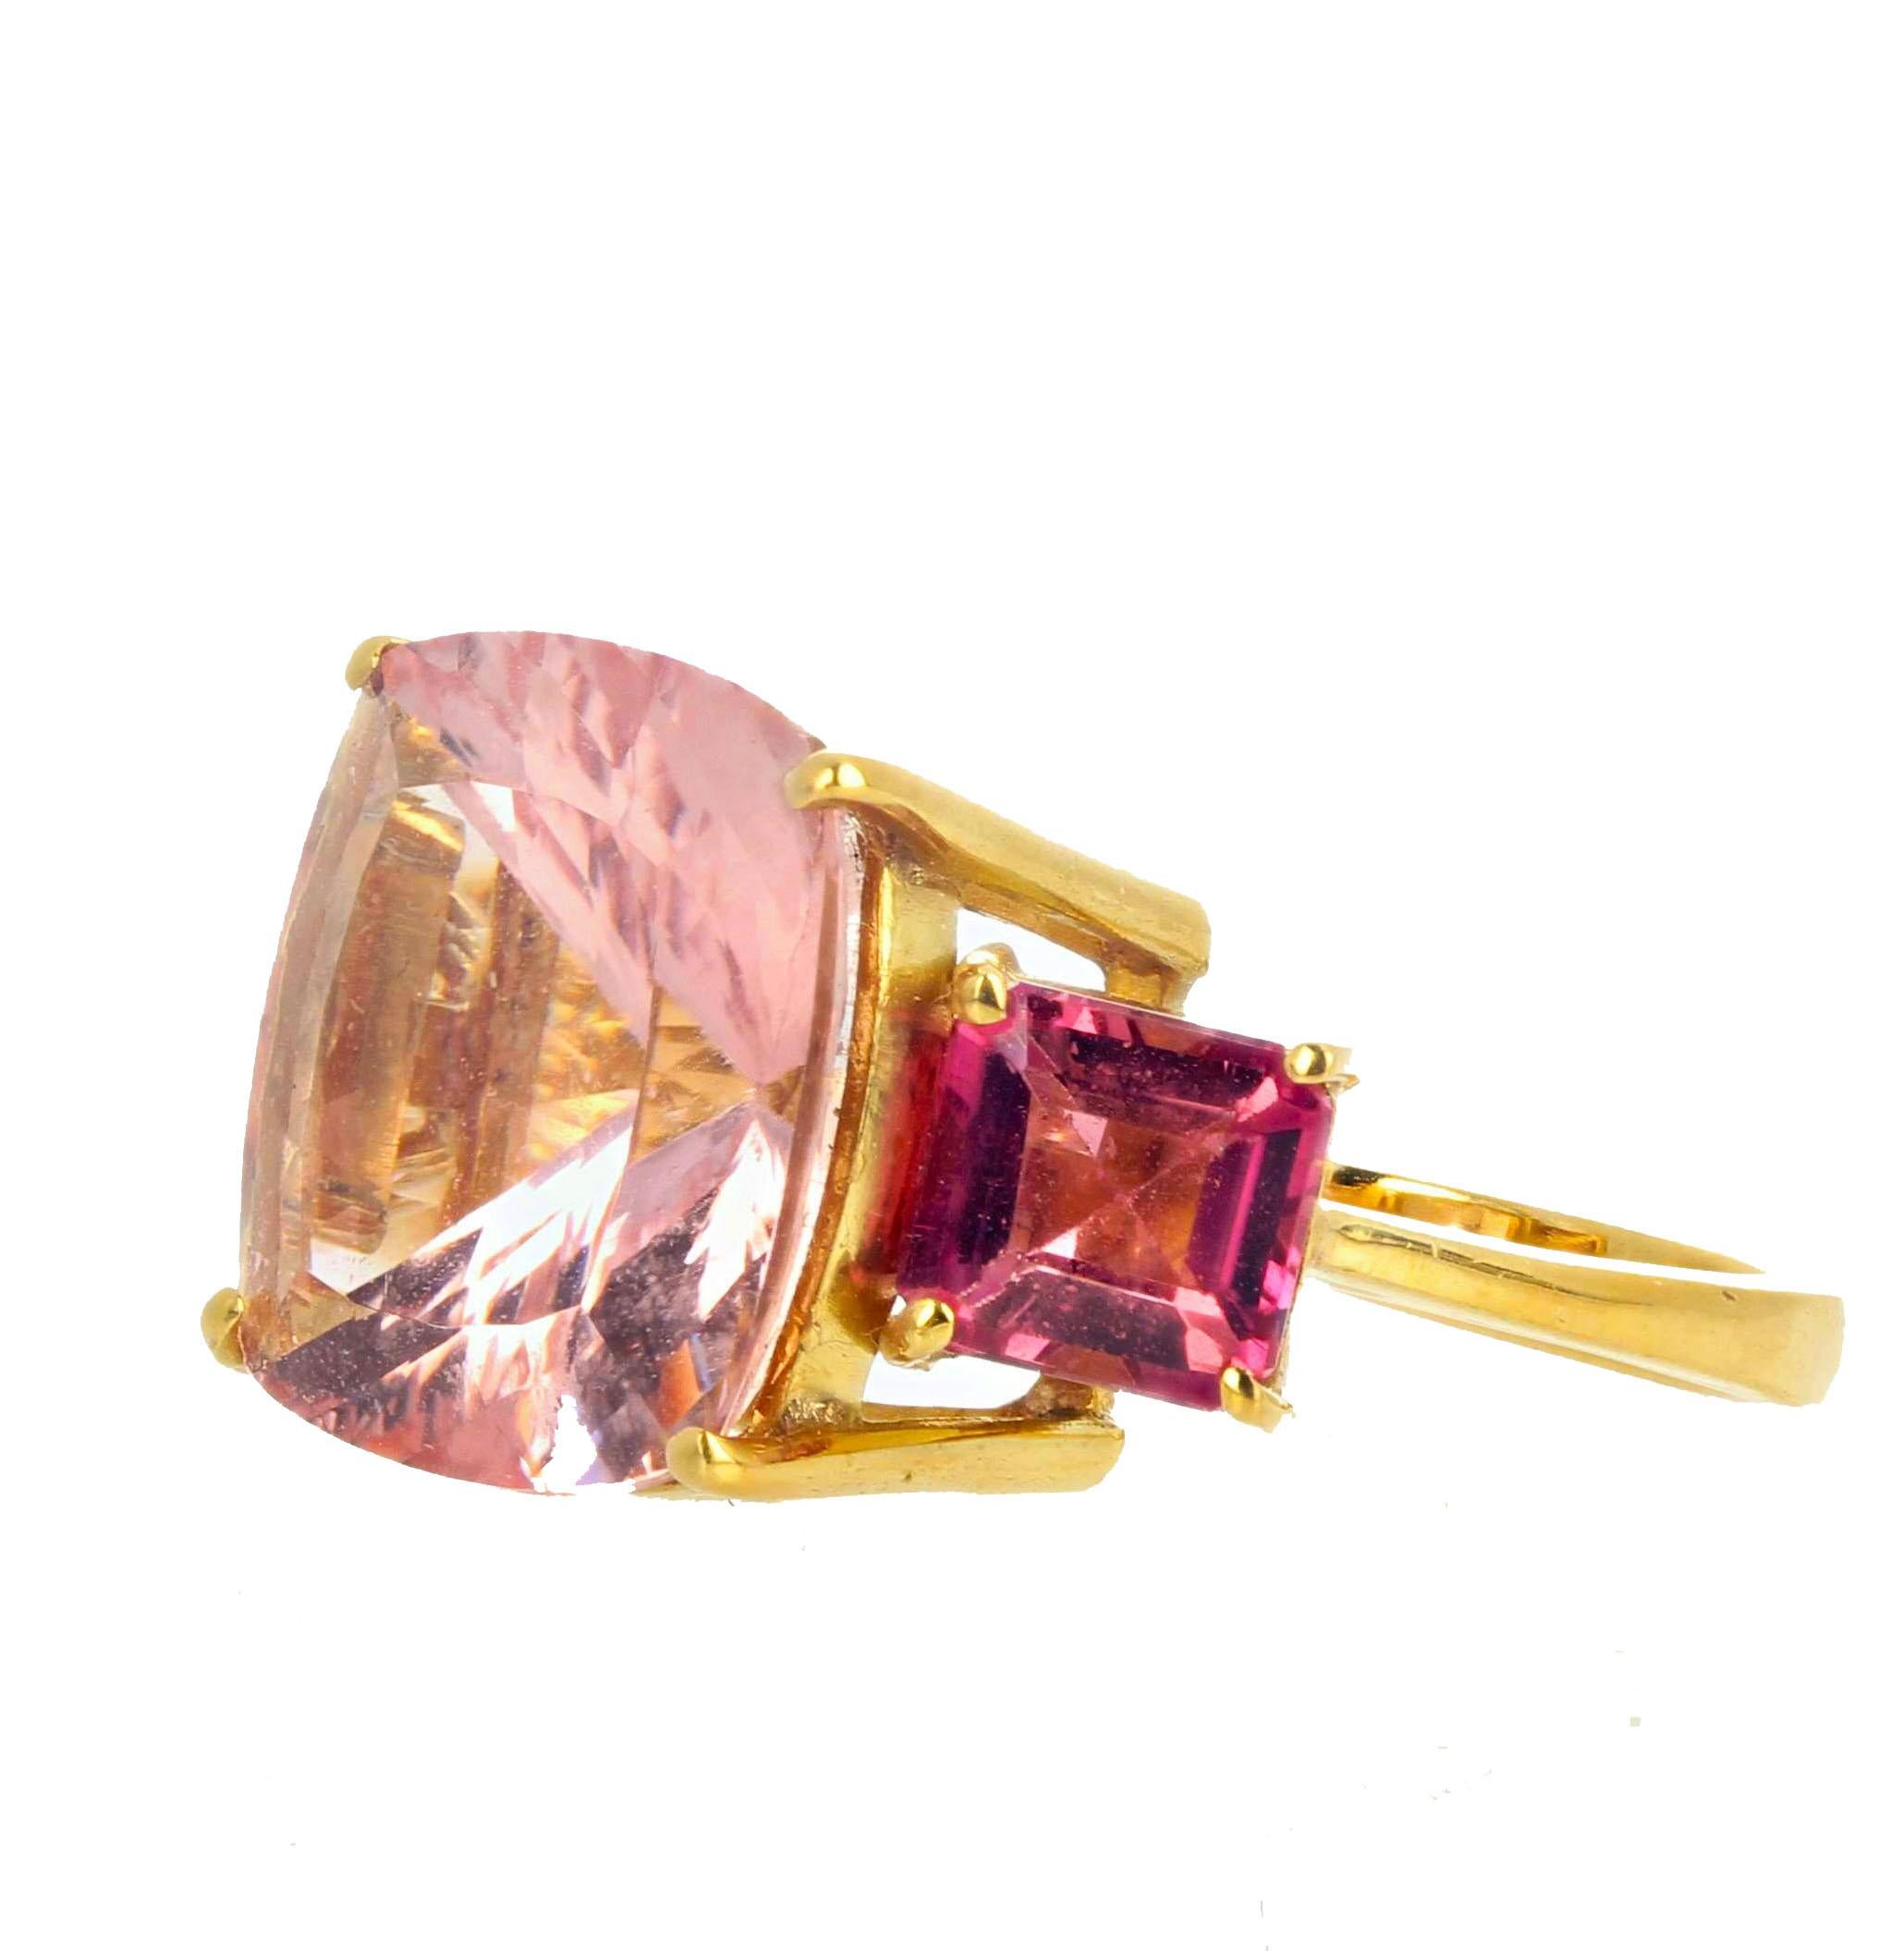 Cushion Cut AJD Absolutely Magnificent 8.89 Ct Blush Morganite & Tourmaline Gold Ring